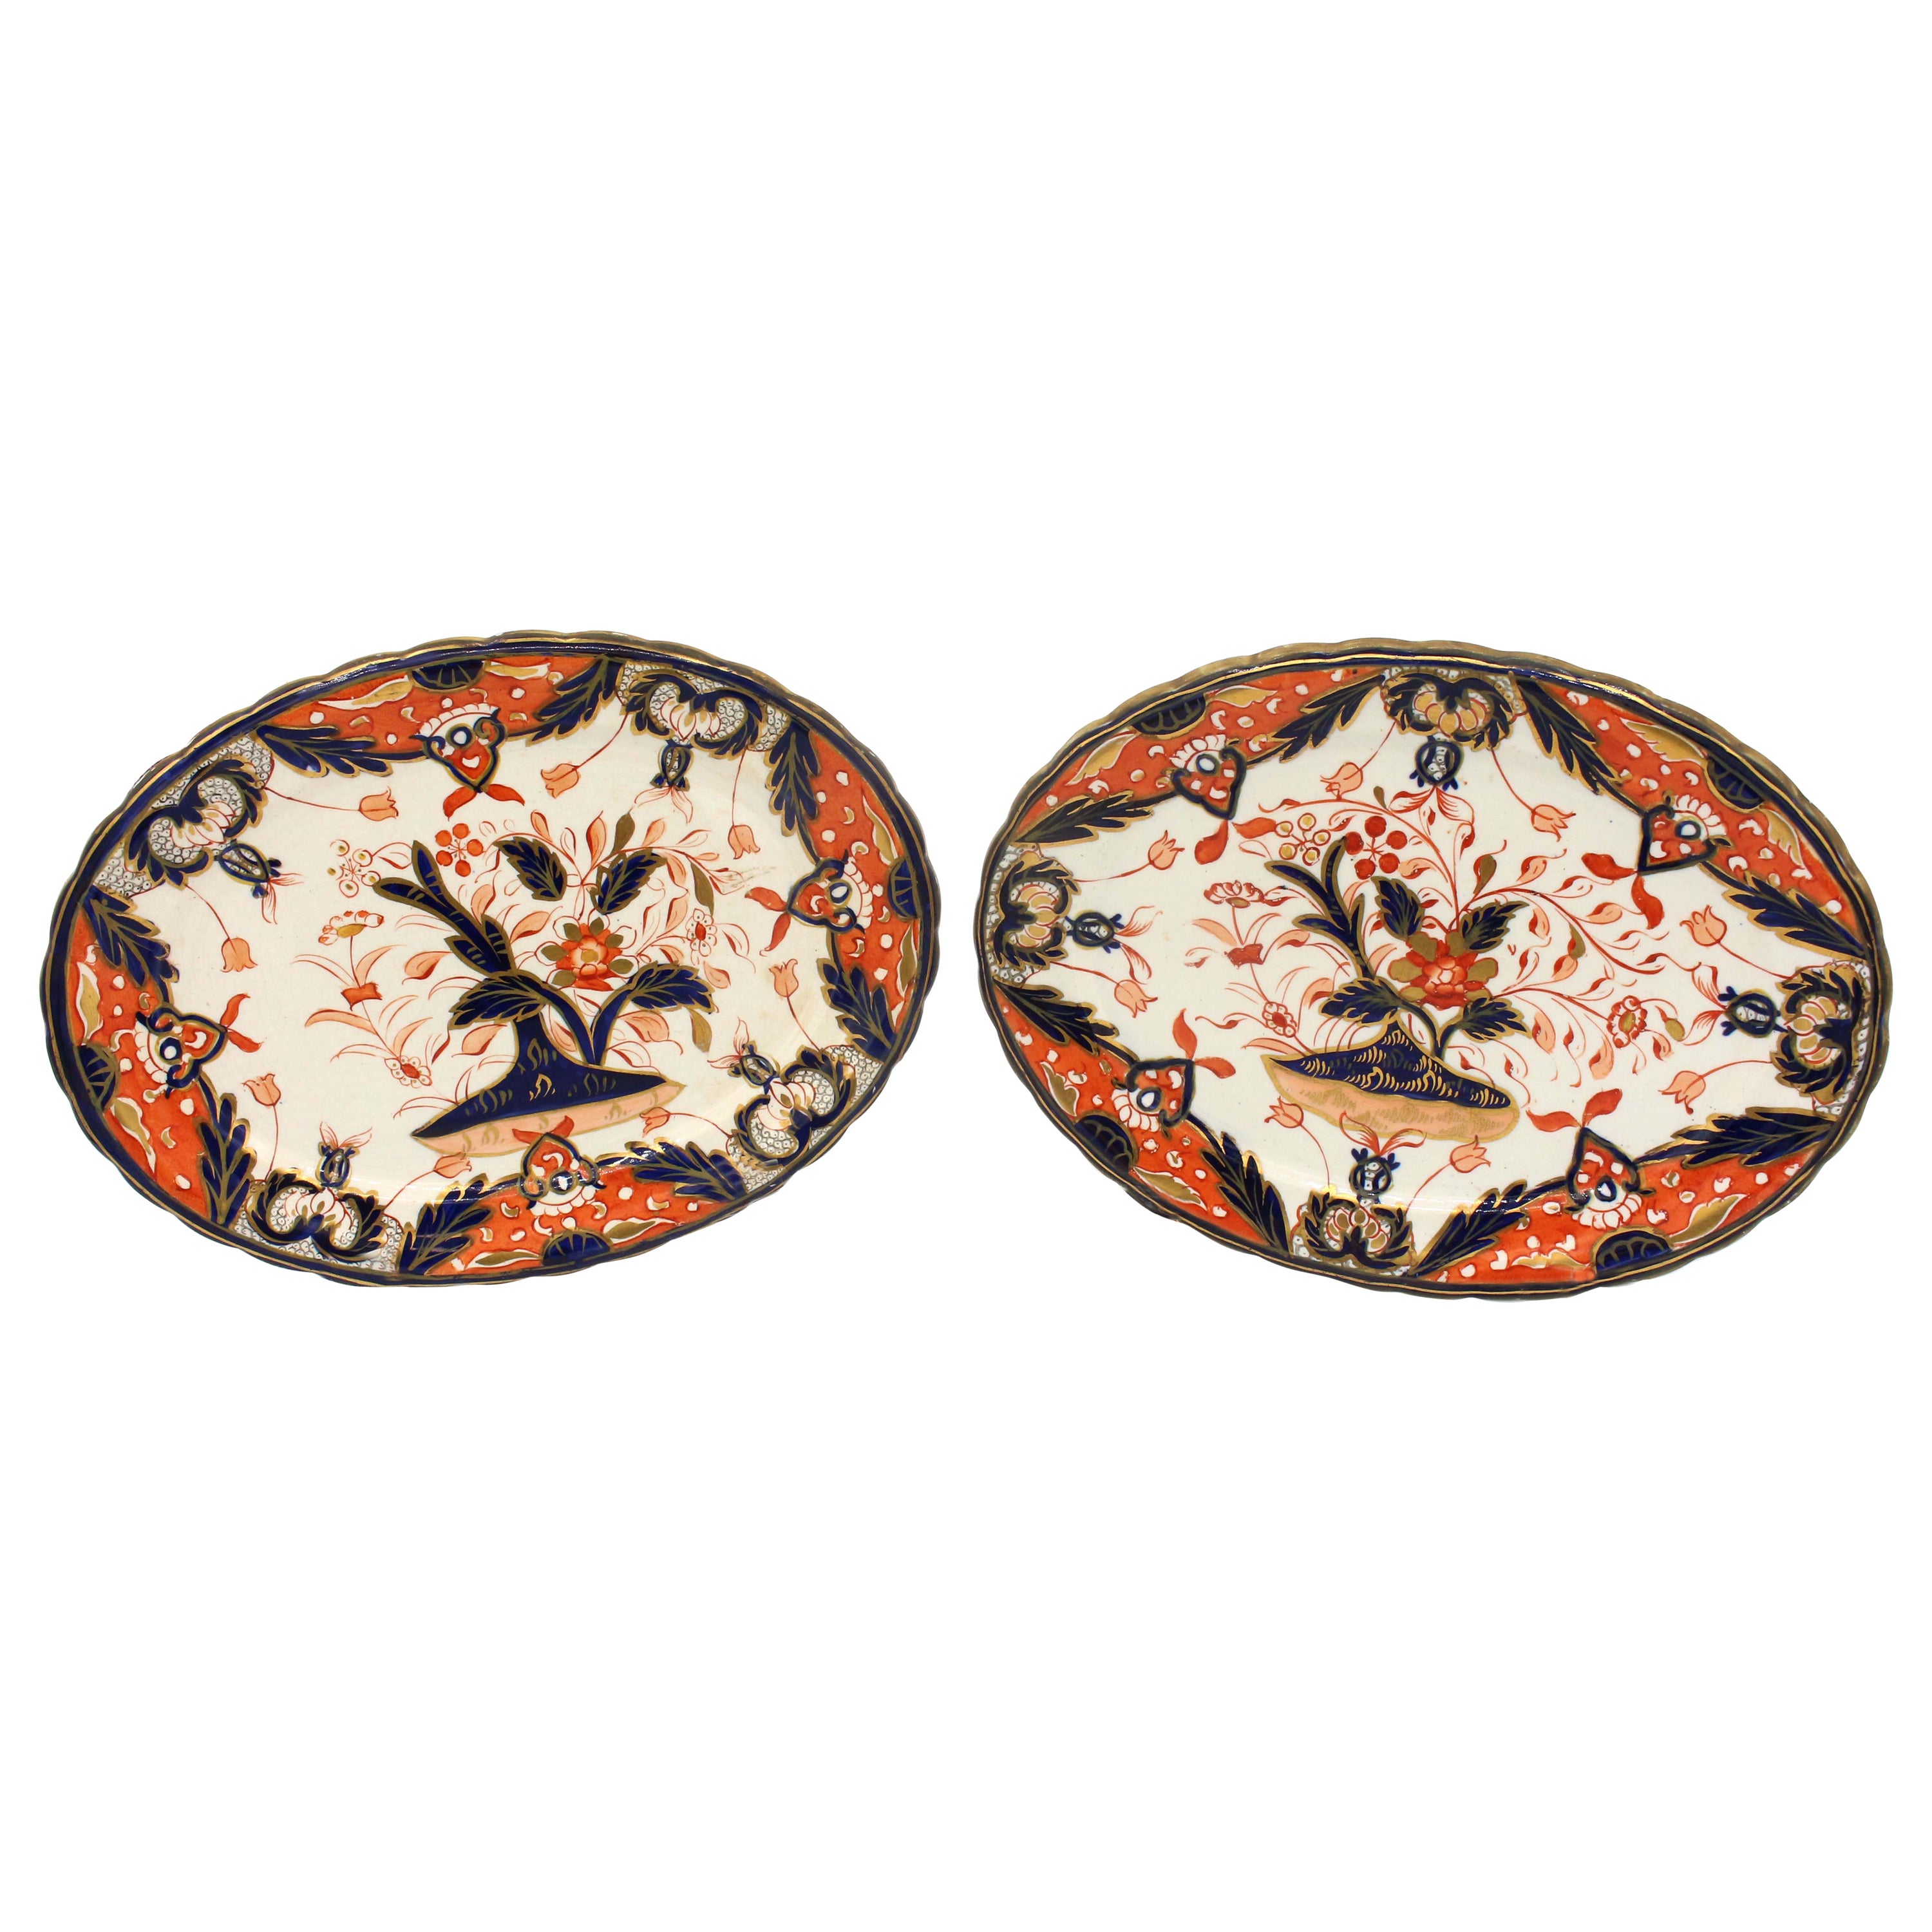 Pair of Saucier Stands, Stoneware by Davenport, Imari pattern, late 19th century For Sale